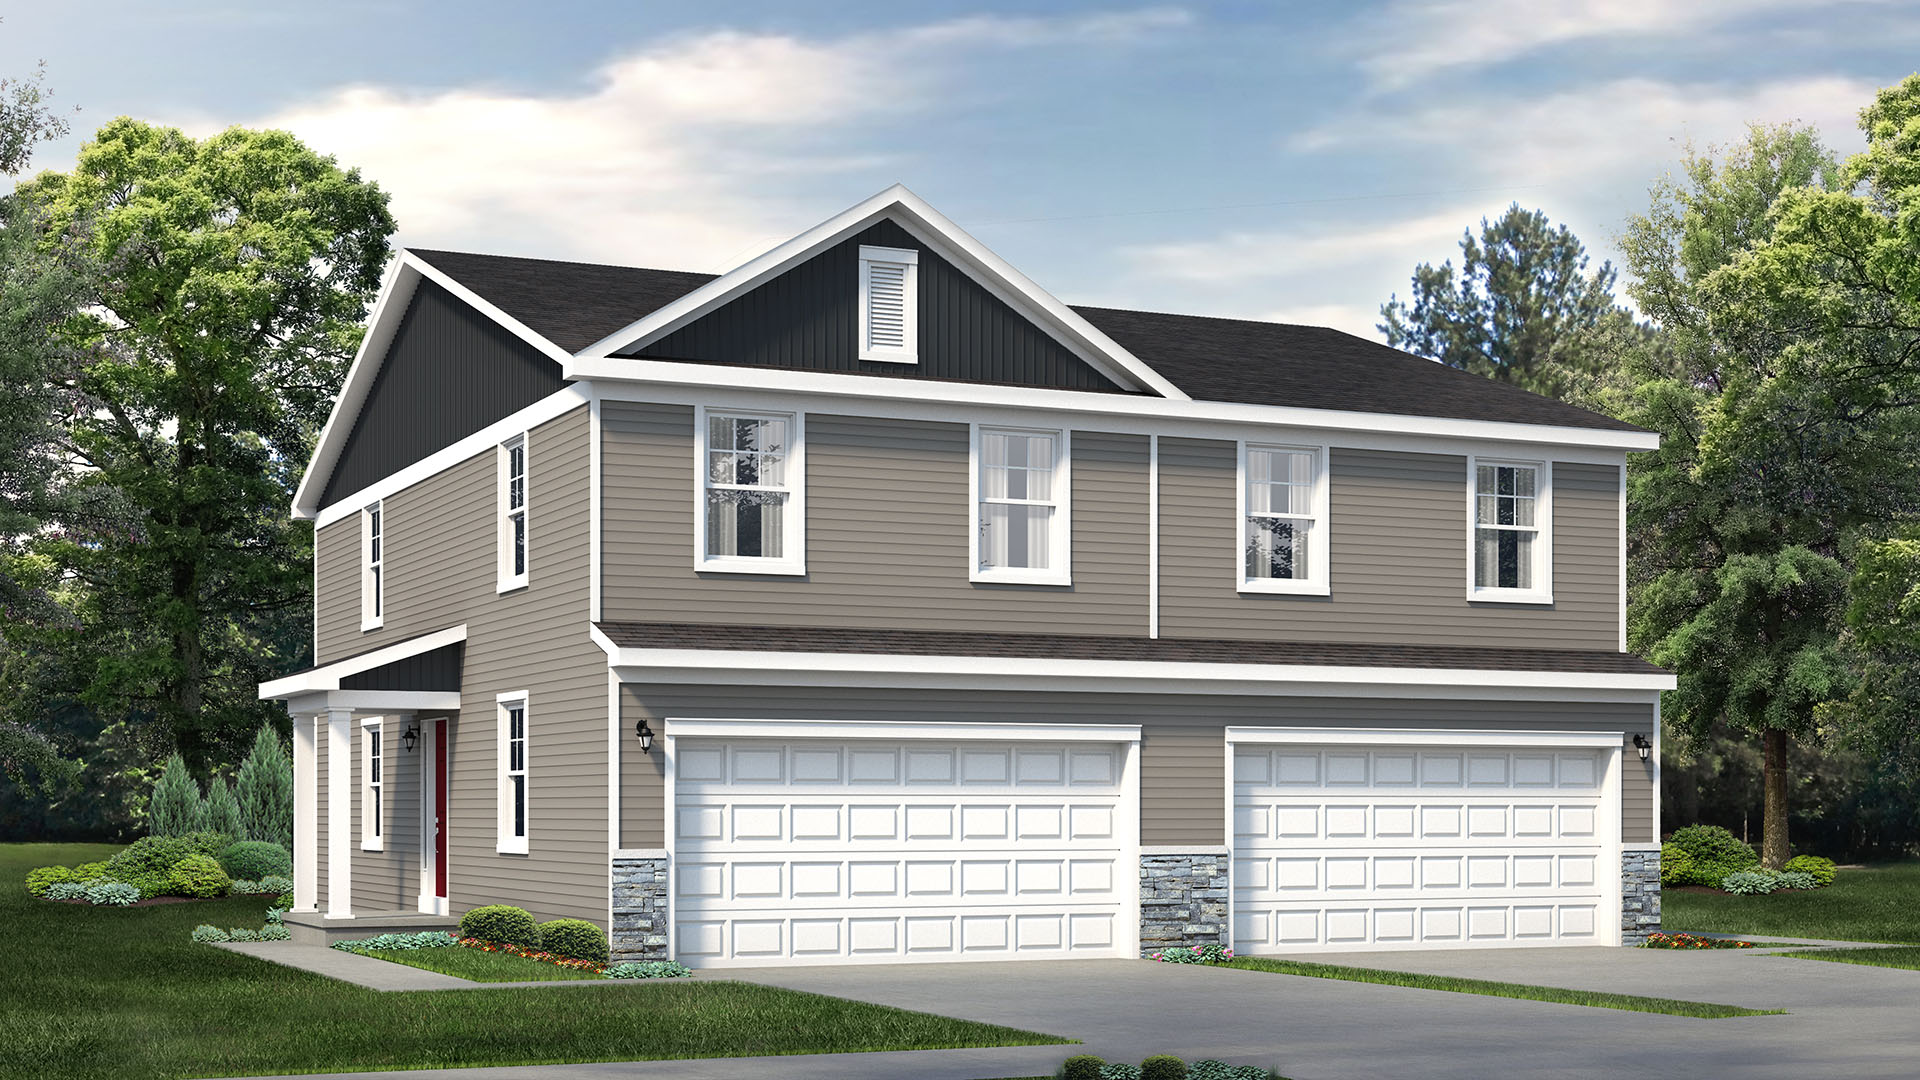 New Blair County Homes Available from S&A Homes